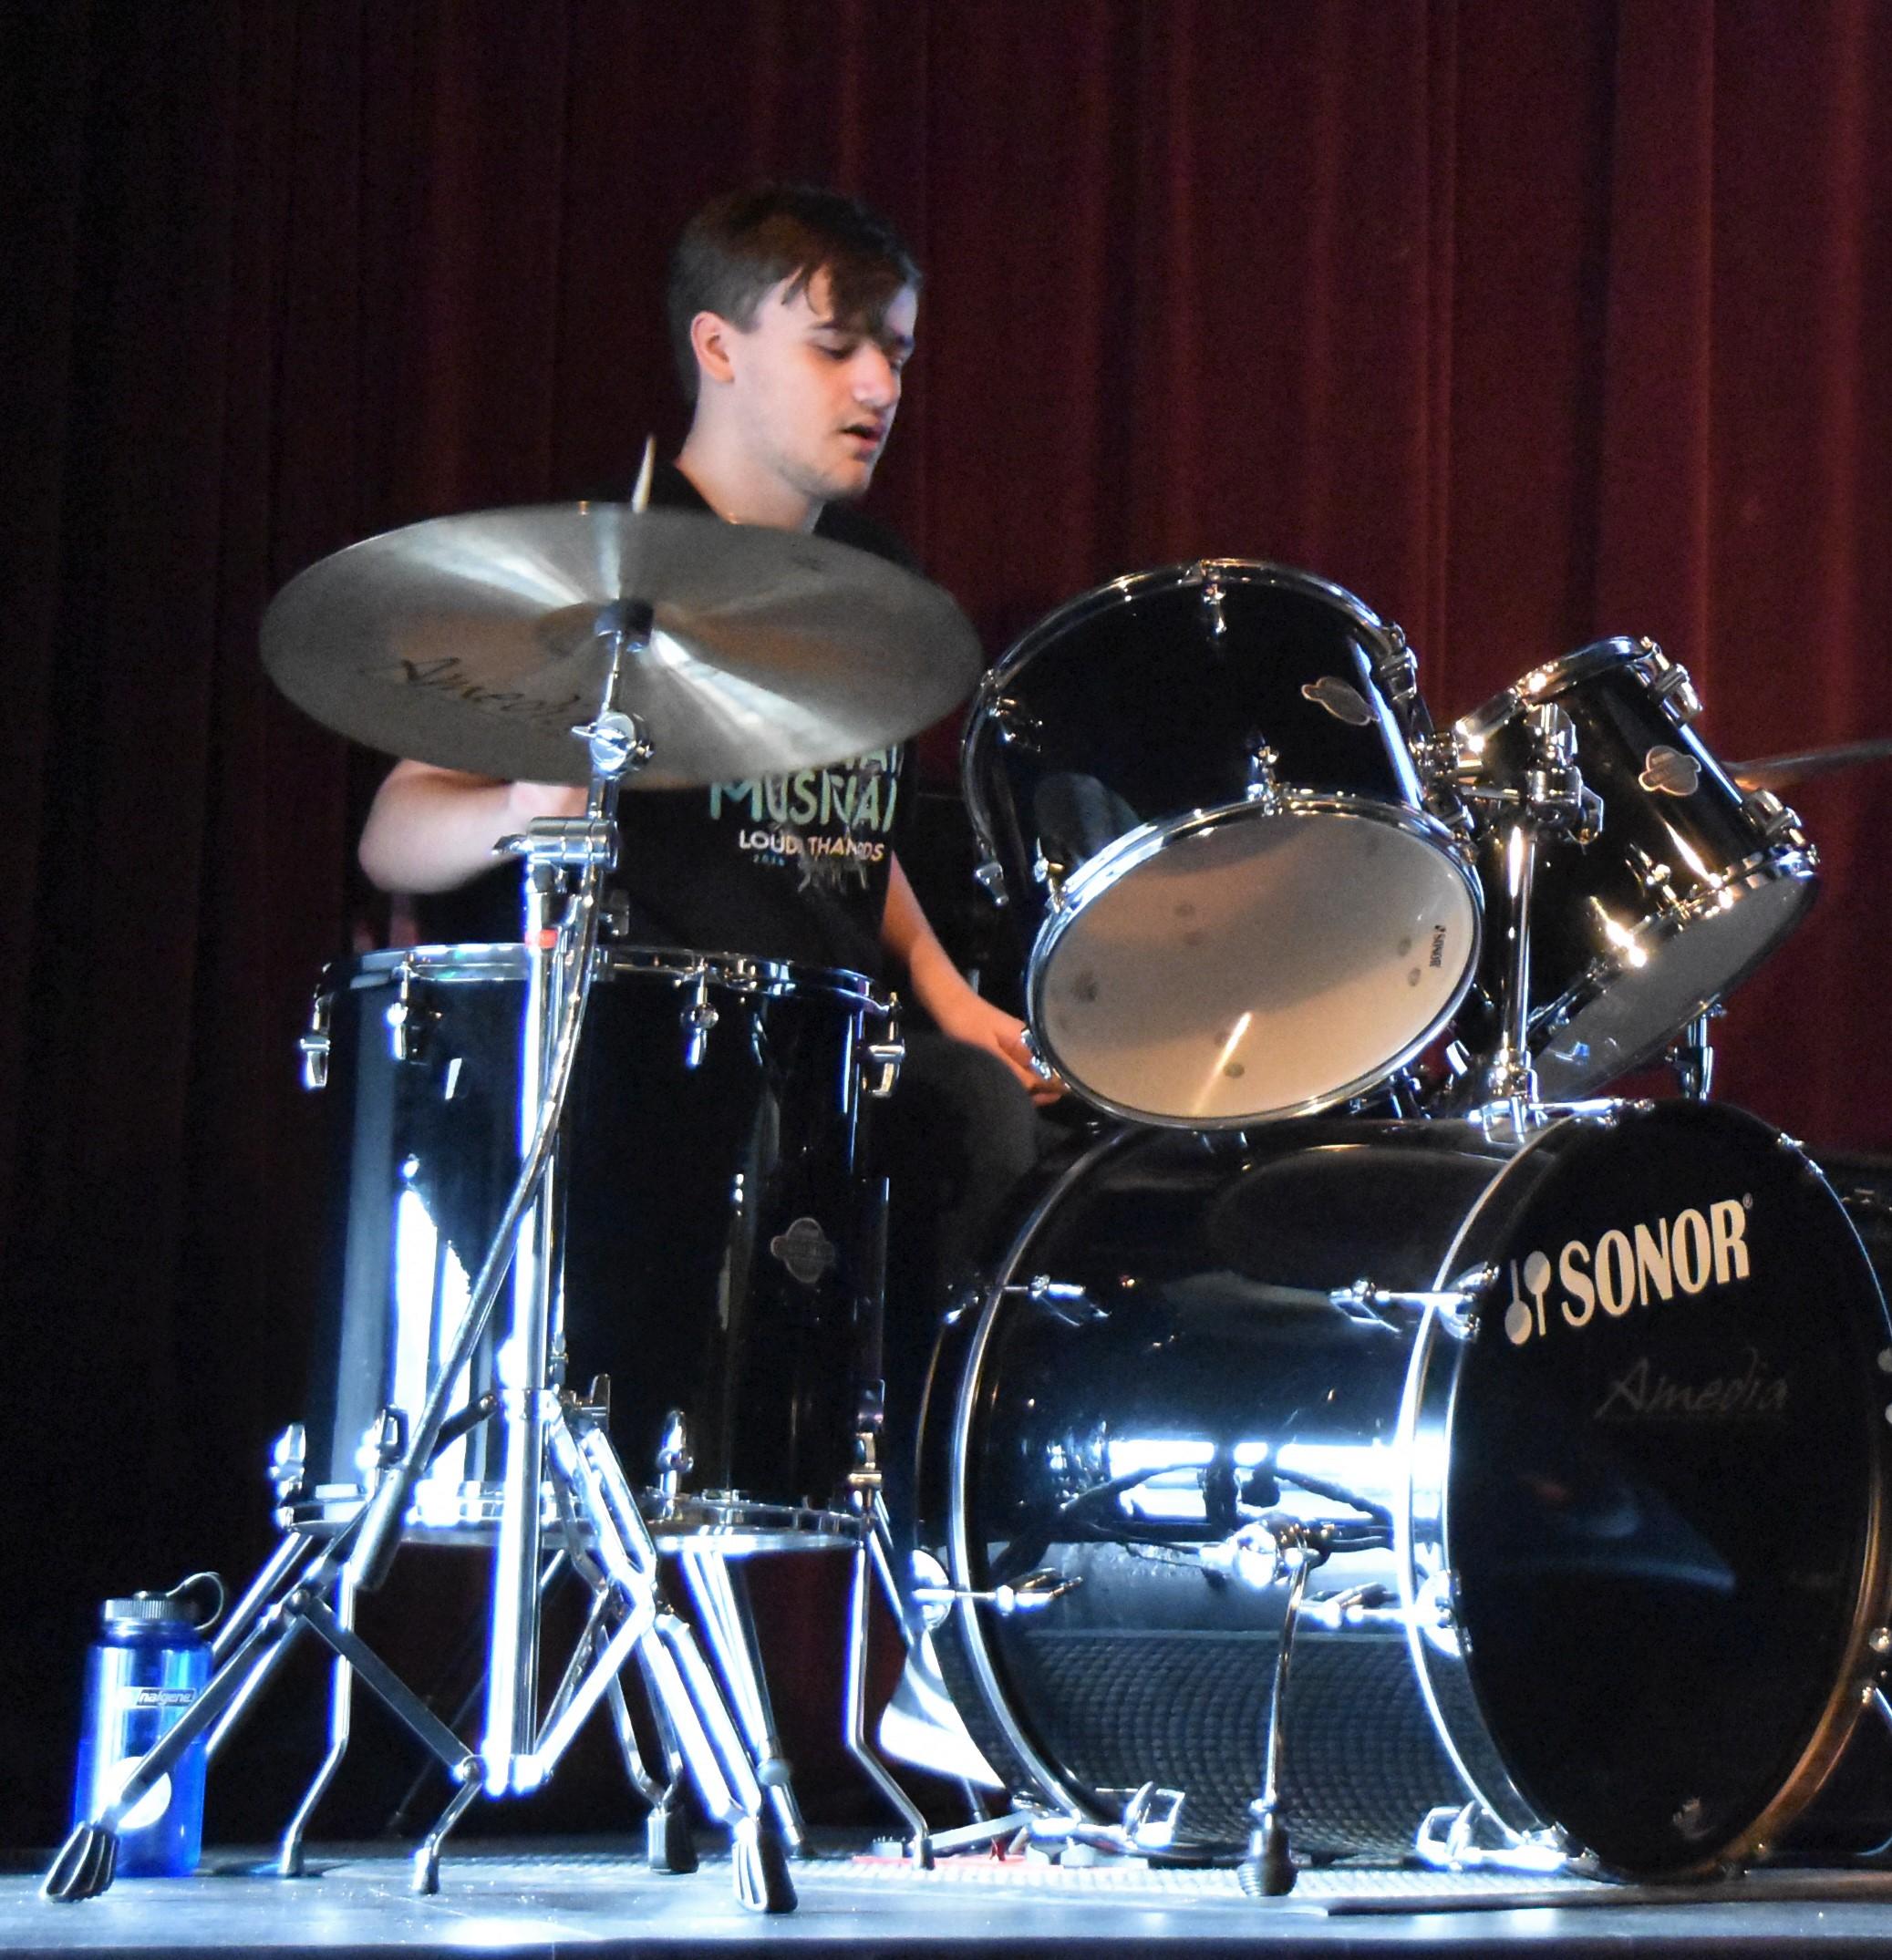 Orella on the drums at chapel